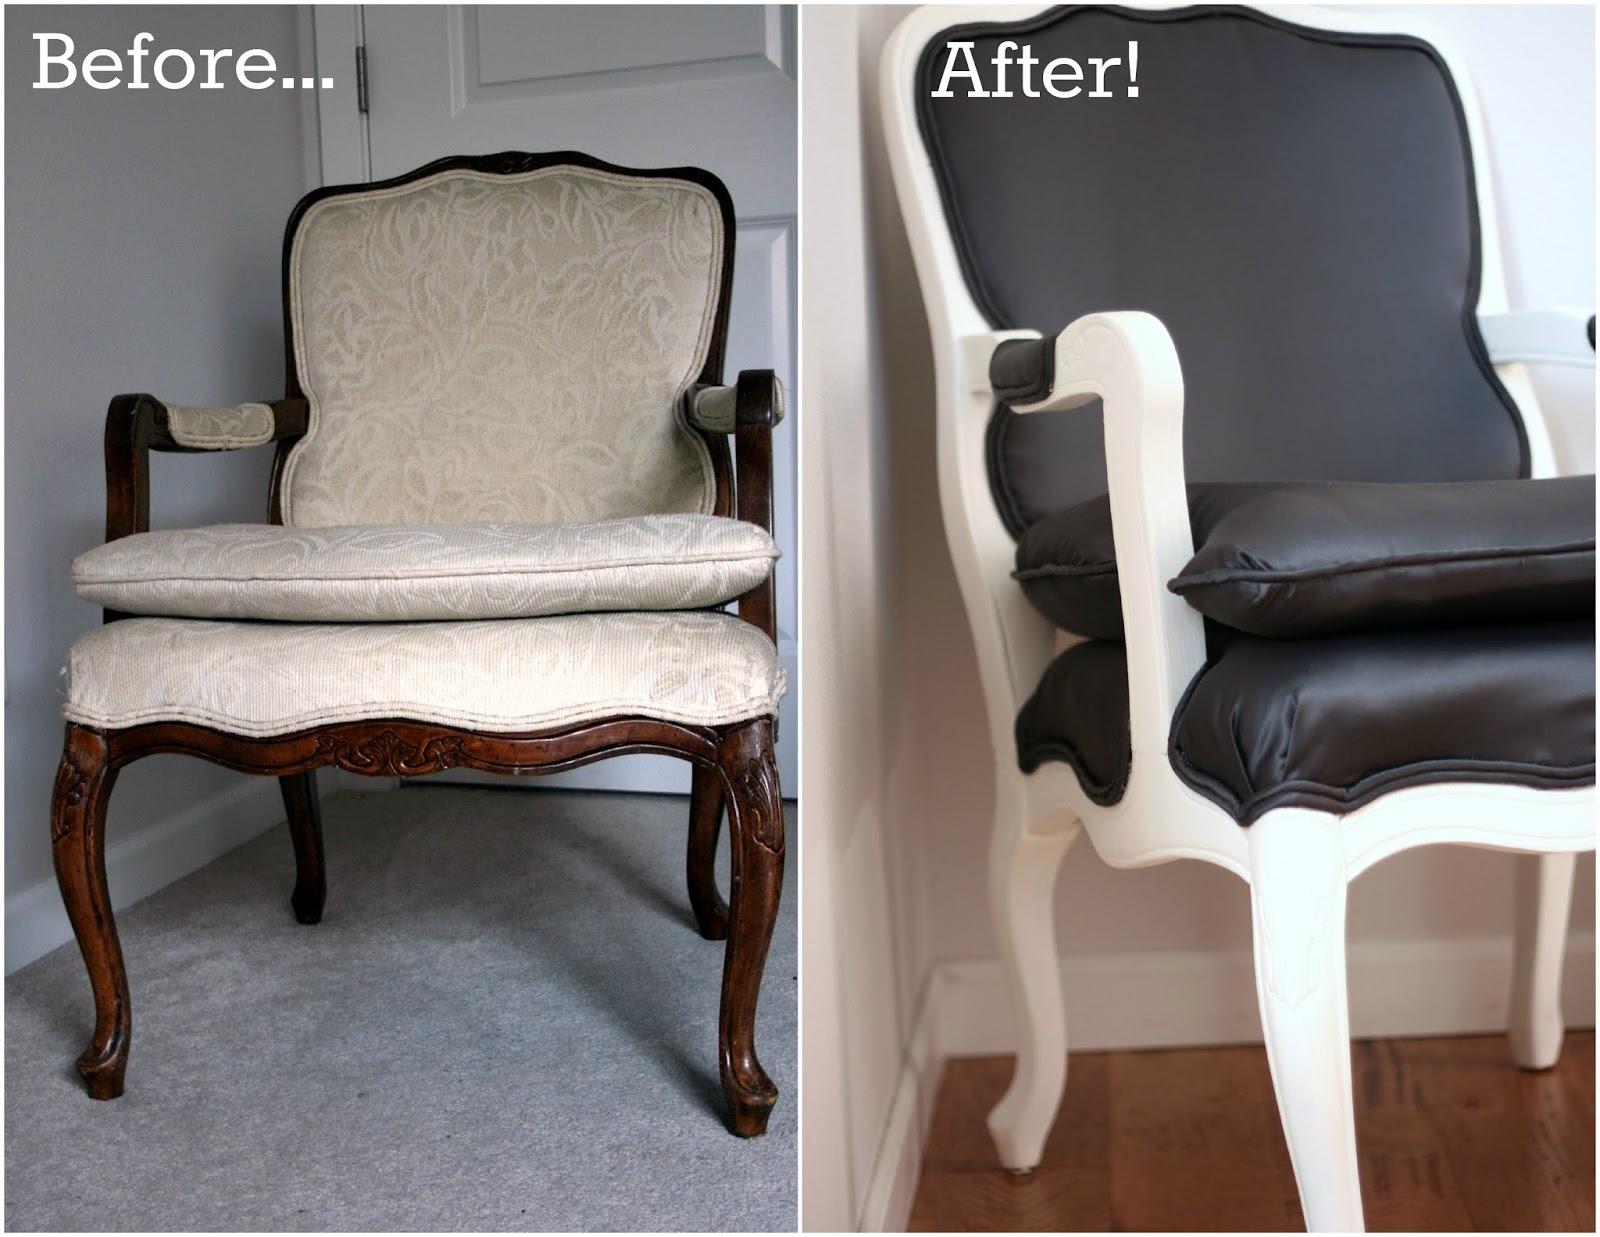 The finished product: my refurbished Louis Chair! (Part 3